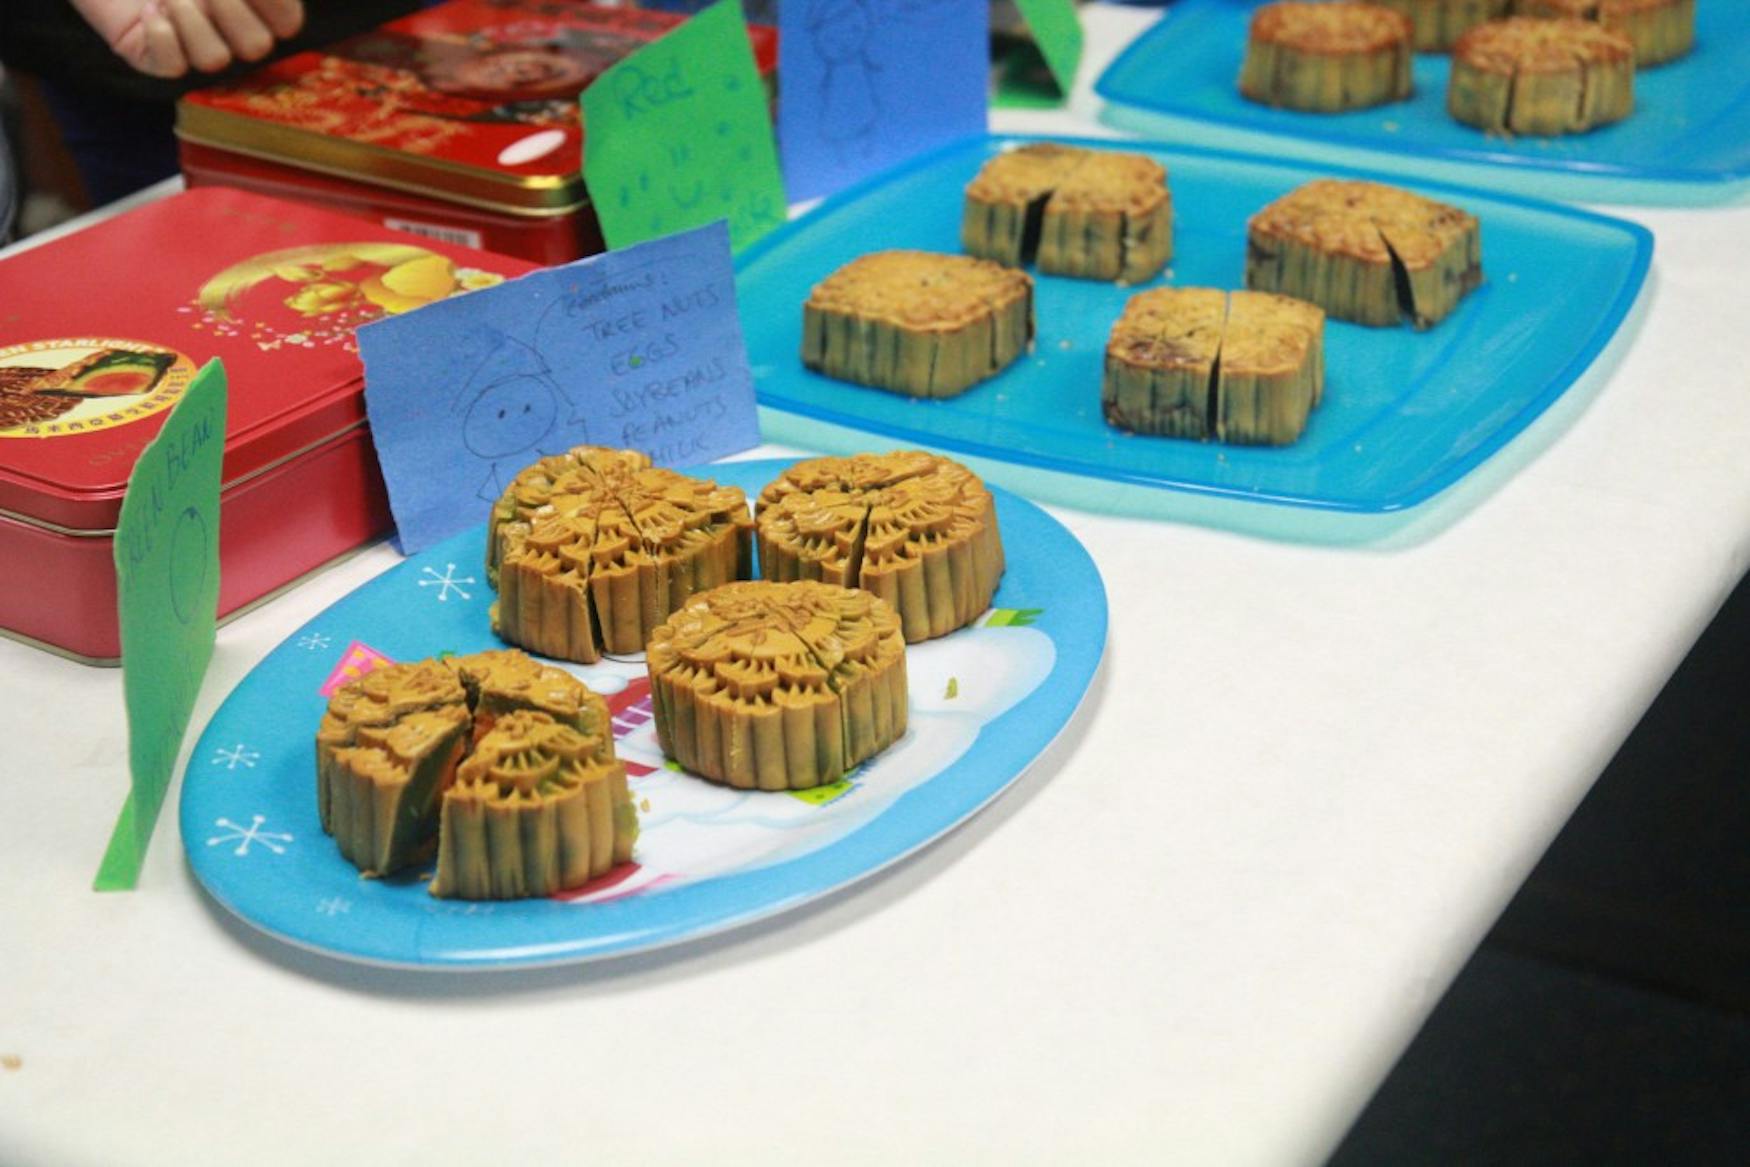 MOON MUNCHINGS: The event provided traditional mooncakes from Waltham restaurant, Tom Can Cook, for attendants to sample.